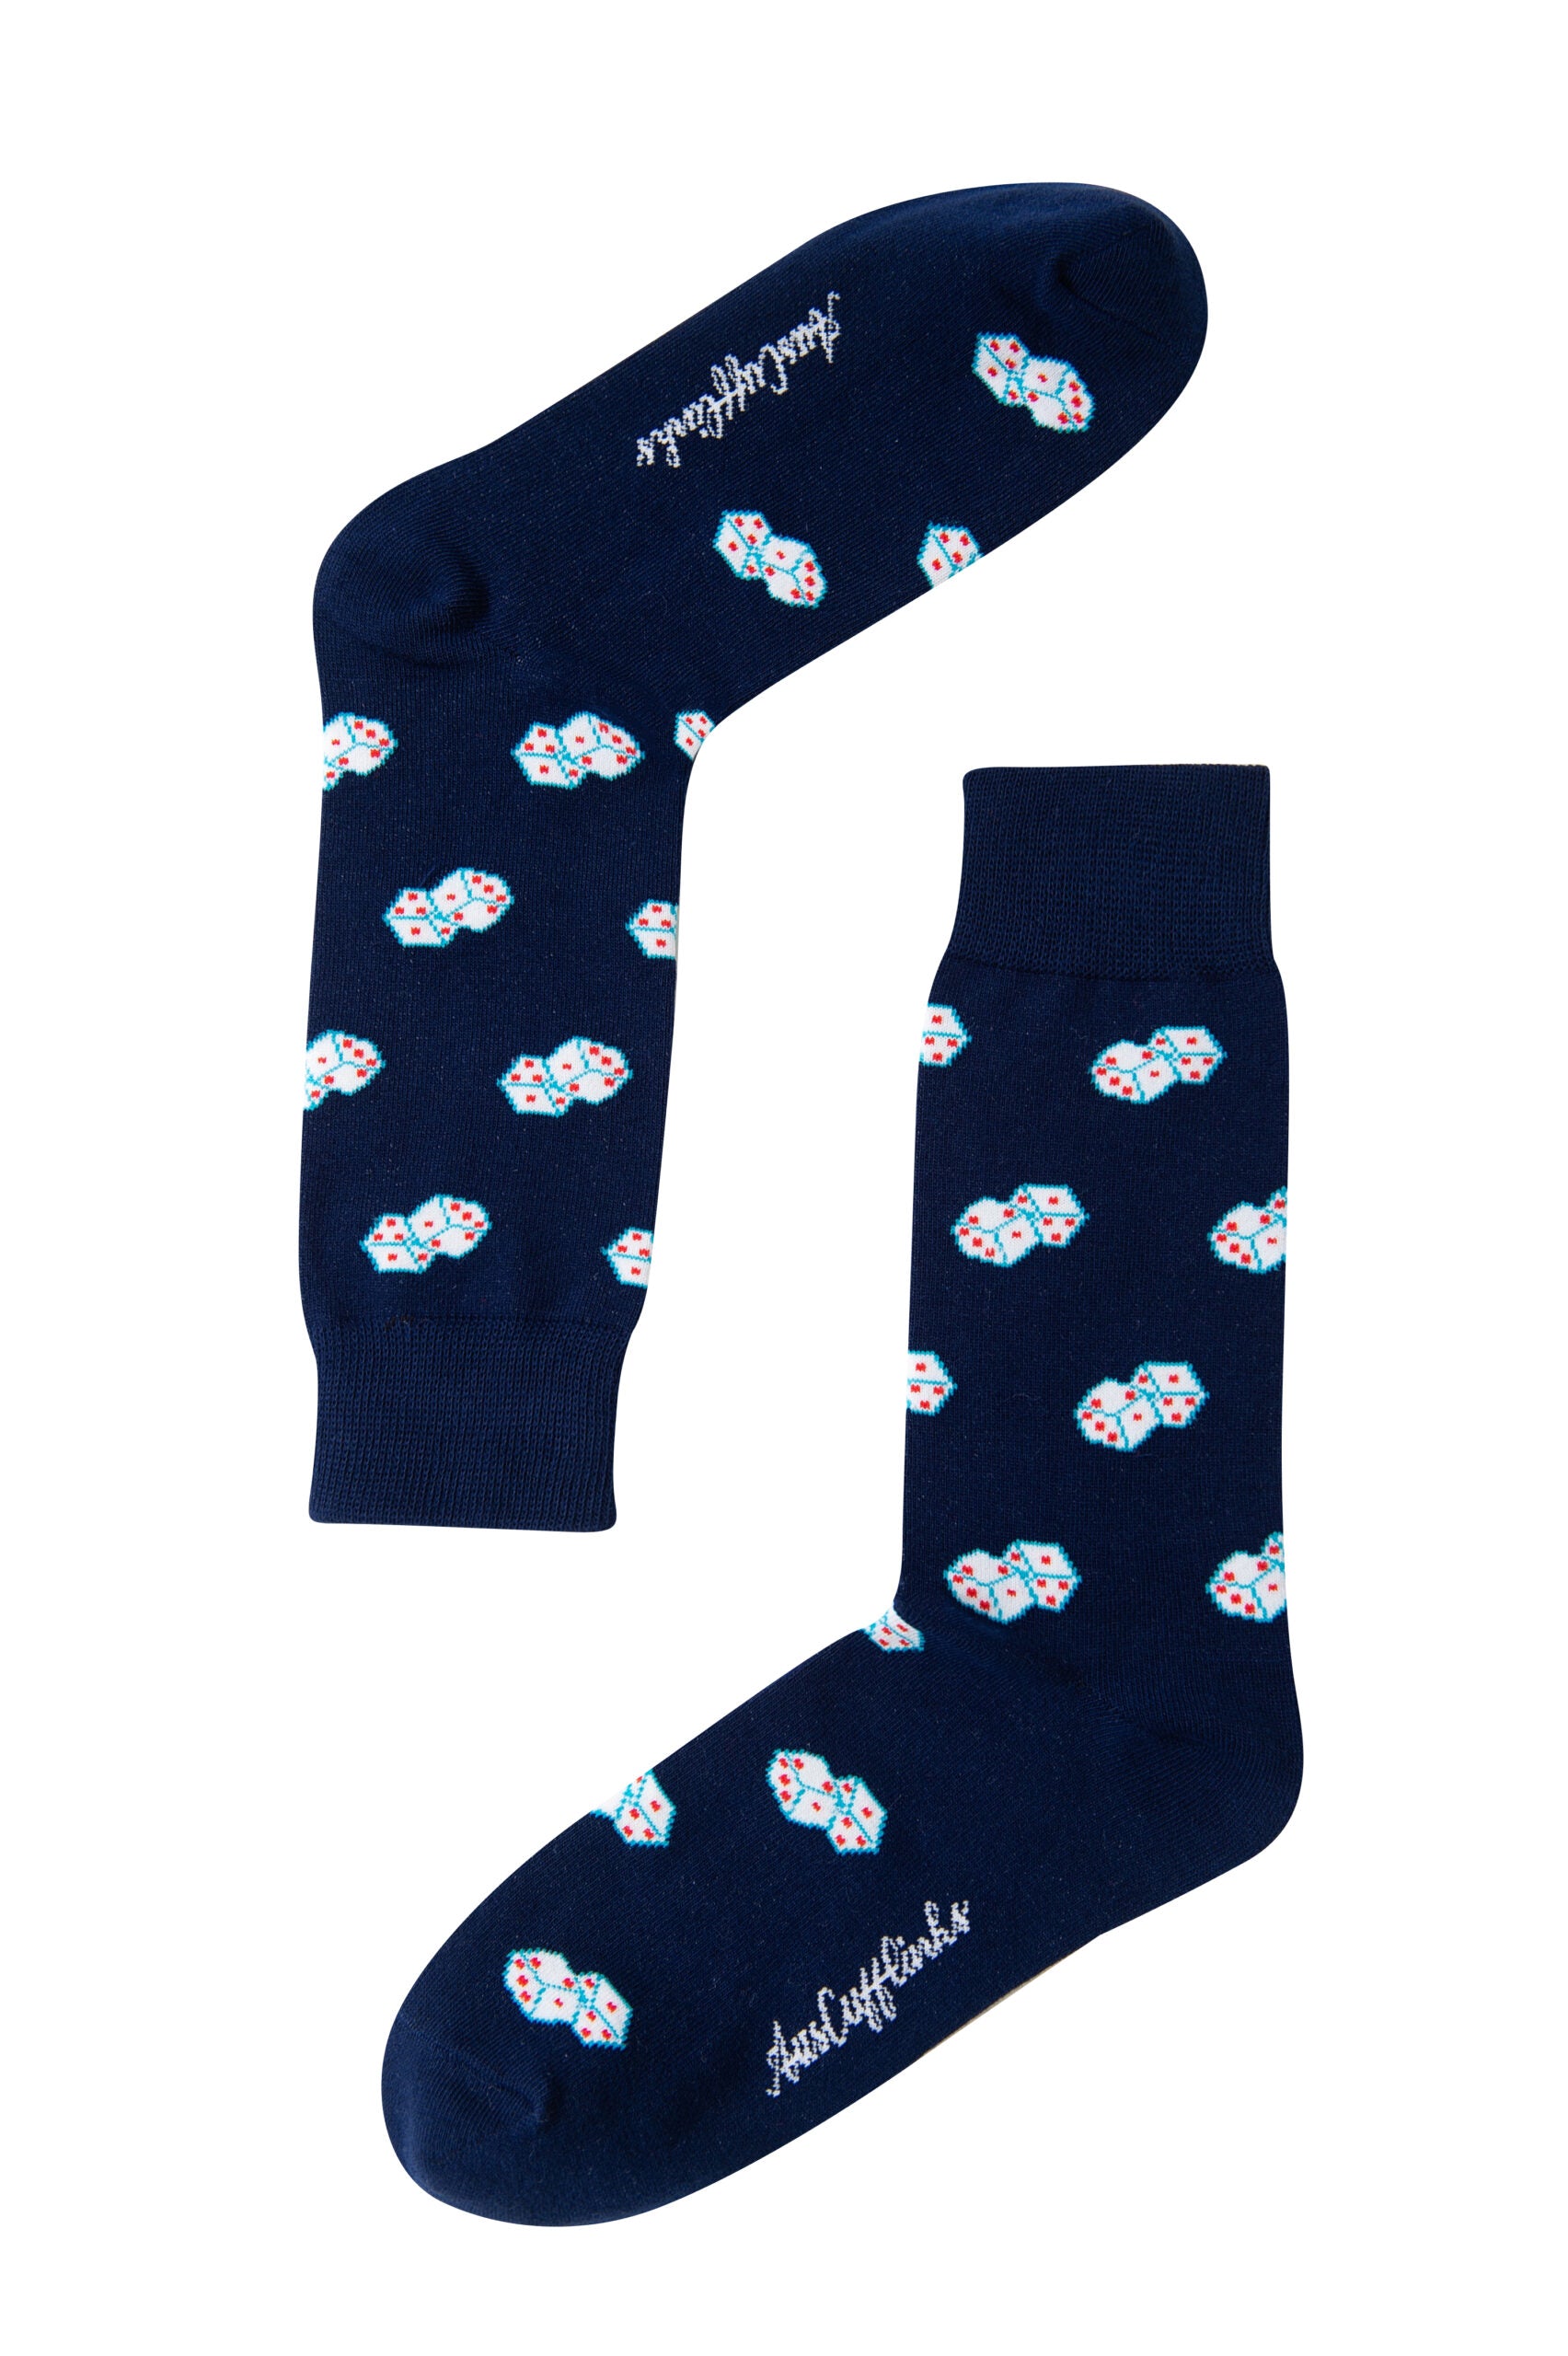 A pair of blue Dice Socks adorned with white dices.